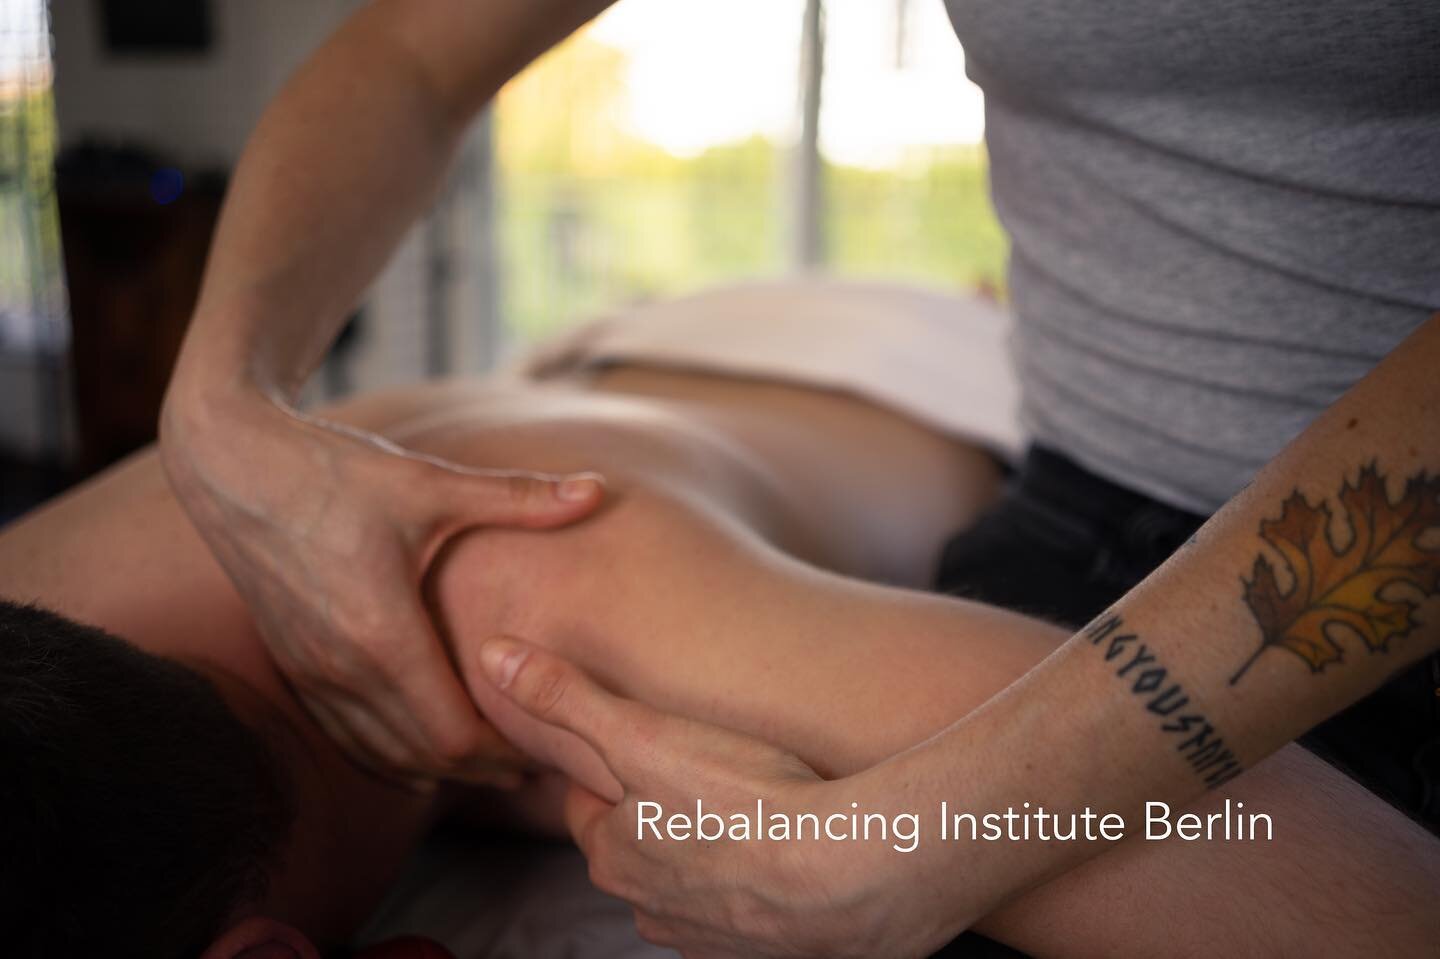 Happy to share that the next Rebalancing Introductory Weekend will happen in Berlin from 10th to 12th March ☀️🌺

Rebalancing Massage Bodywork is a powerful form of bodywork developed in the 1980's in India, combining body awareness and deep tissue m